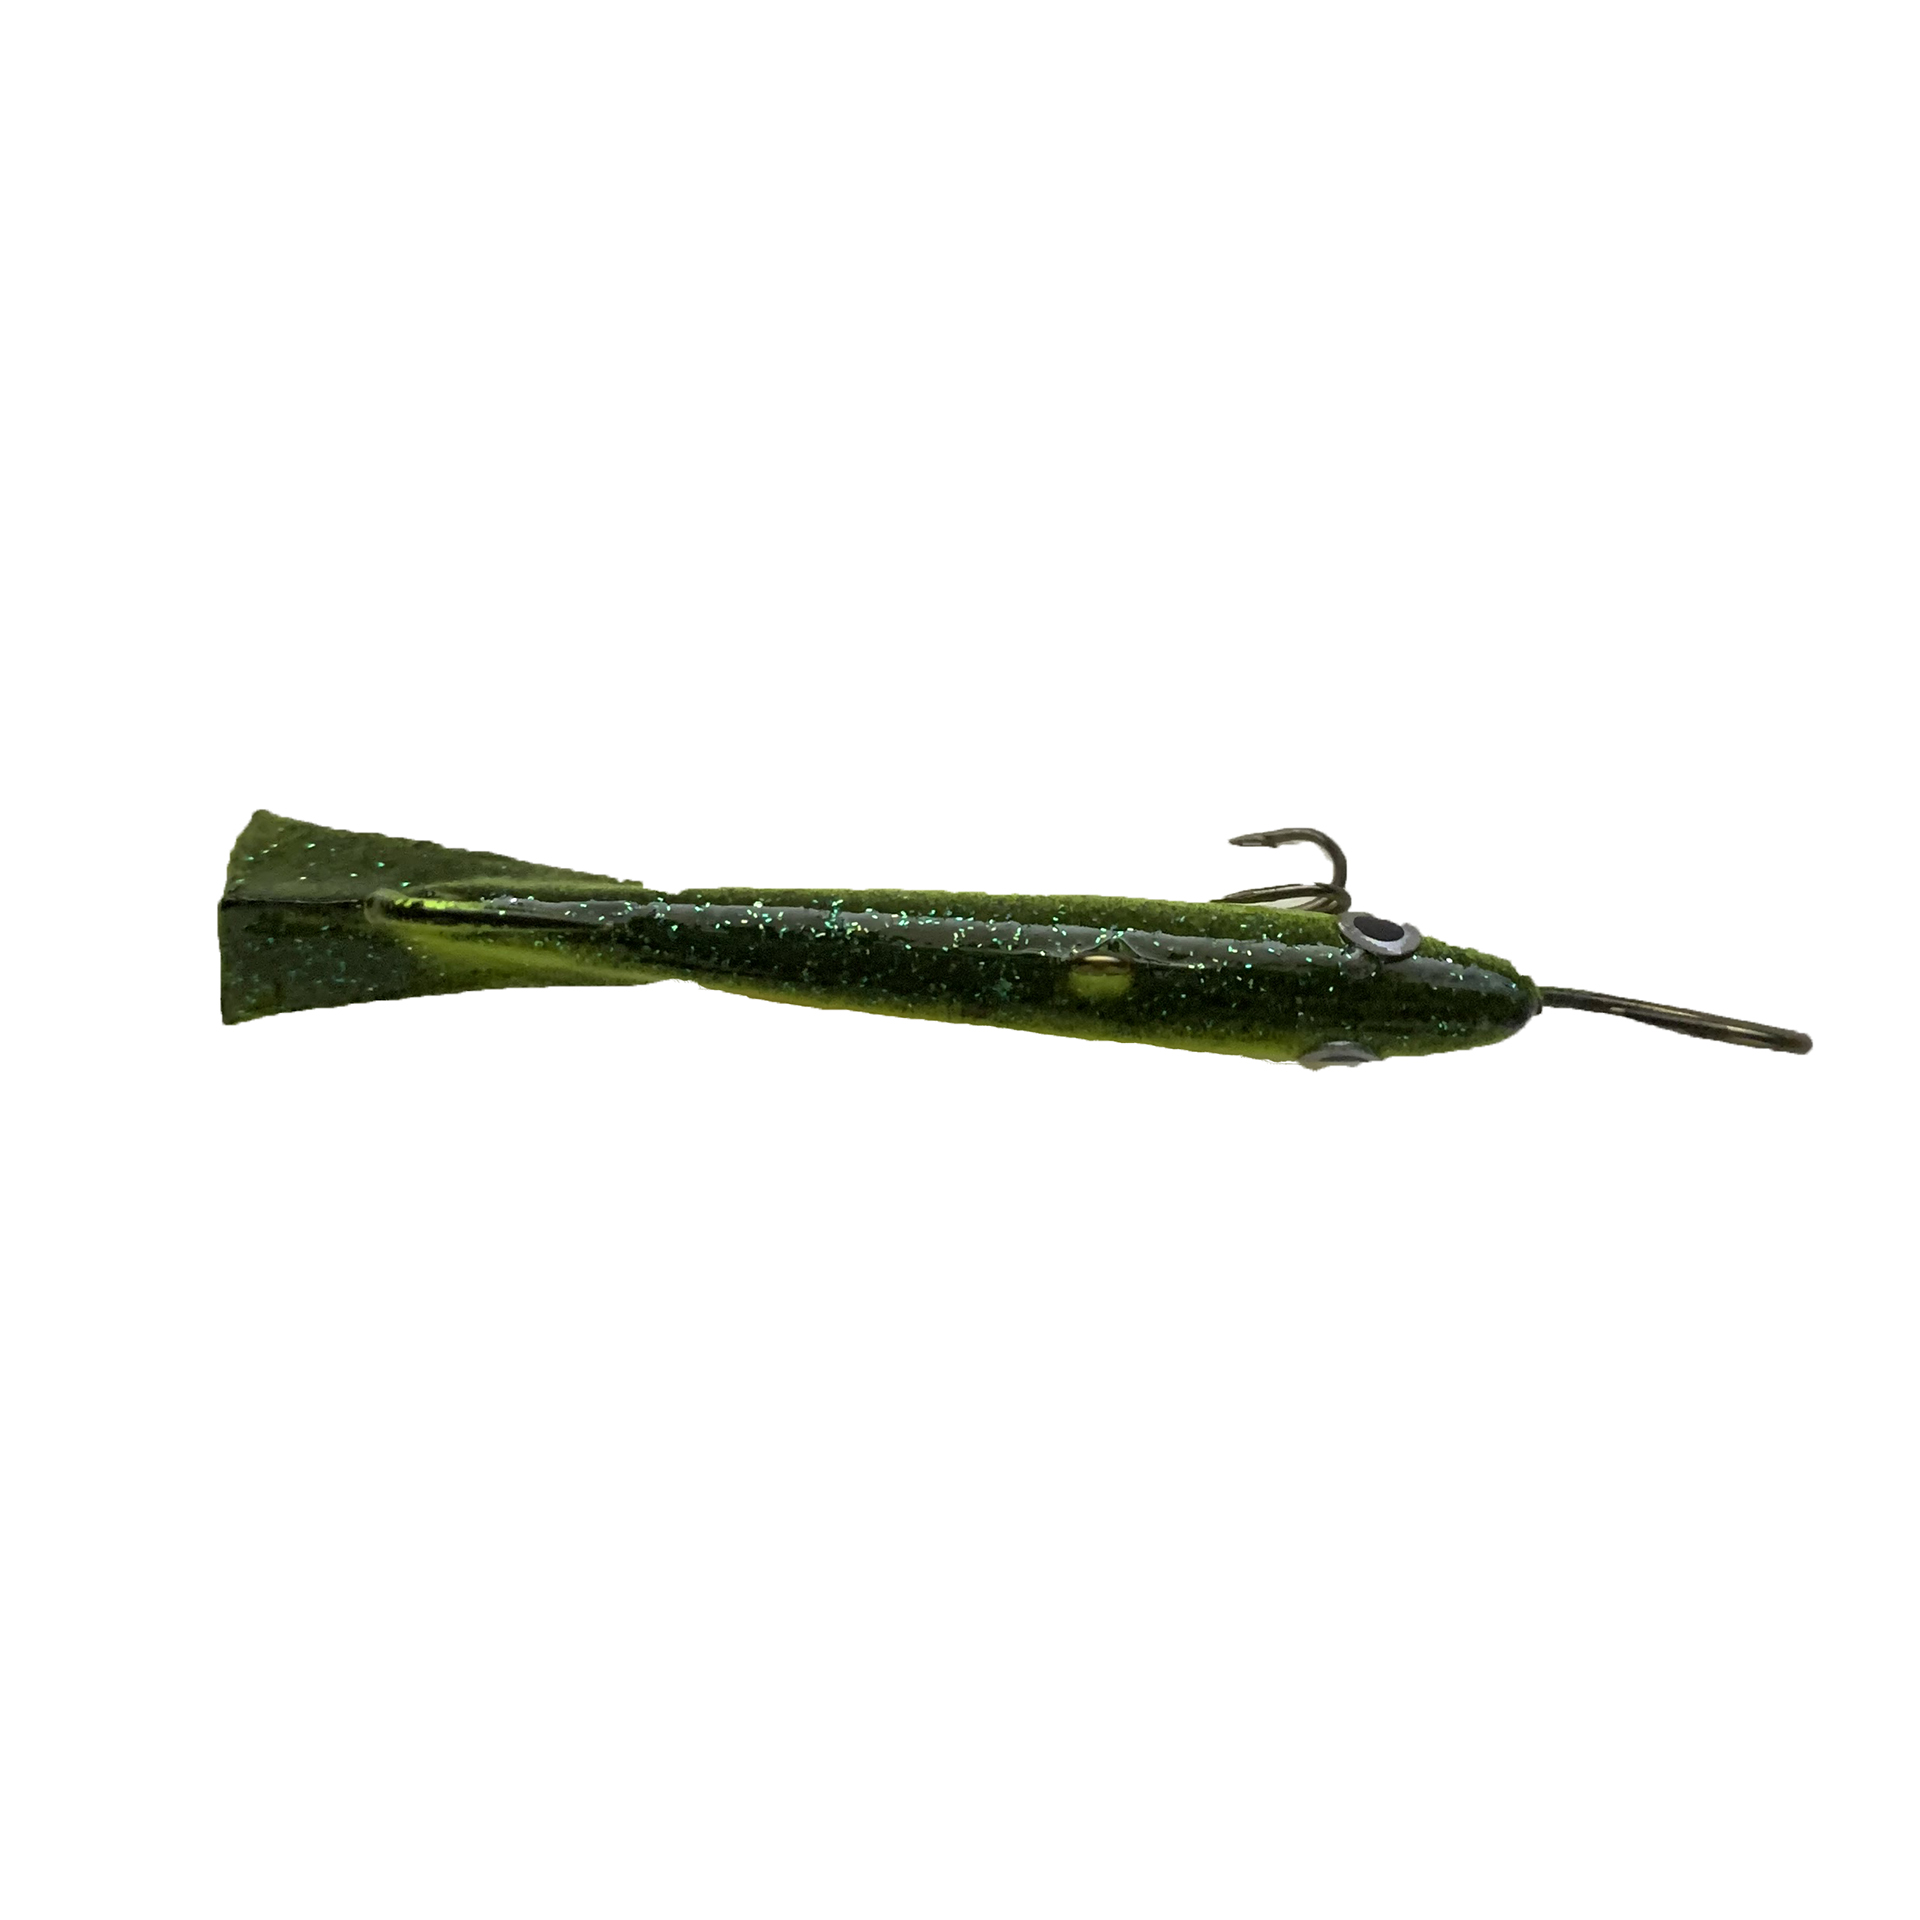 D&D Lures Walleye Ice Jigs – 1/2 oz - Lured Outdoors Ice Fishing